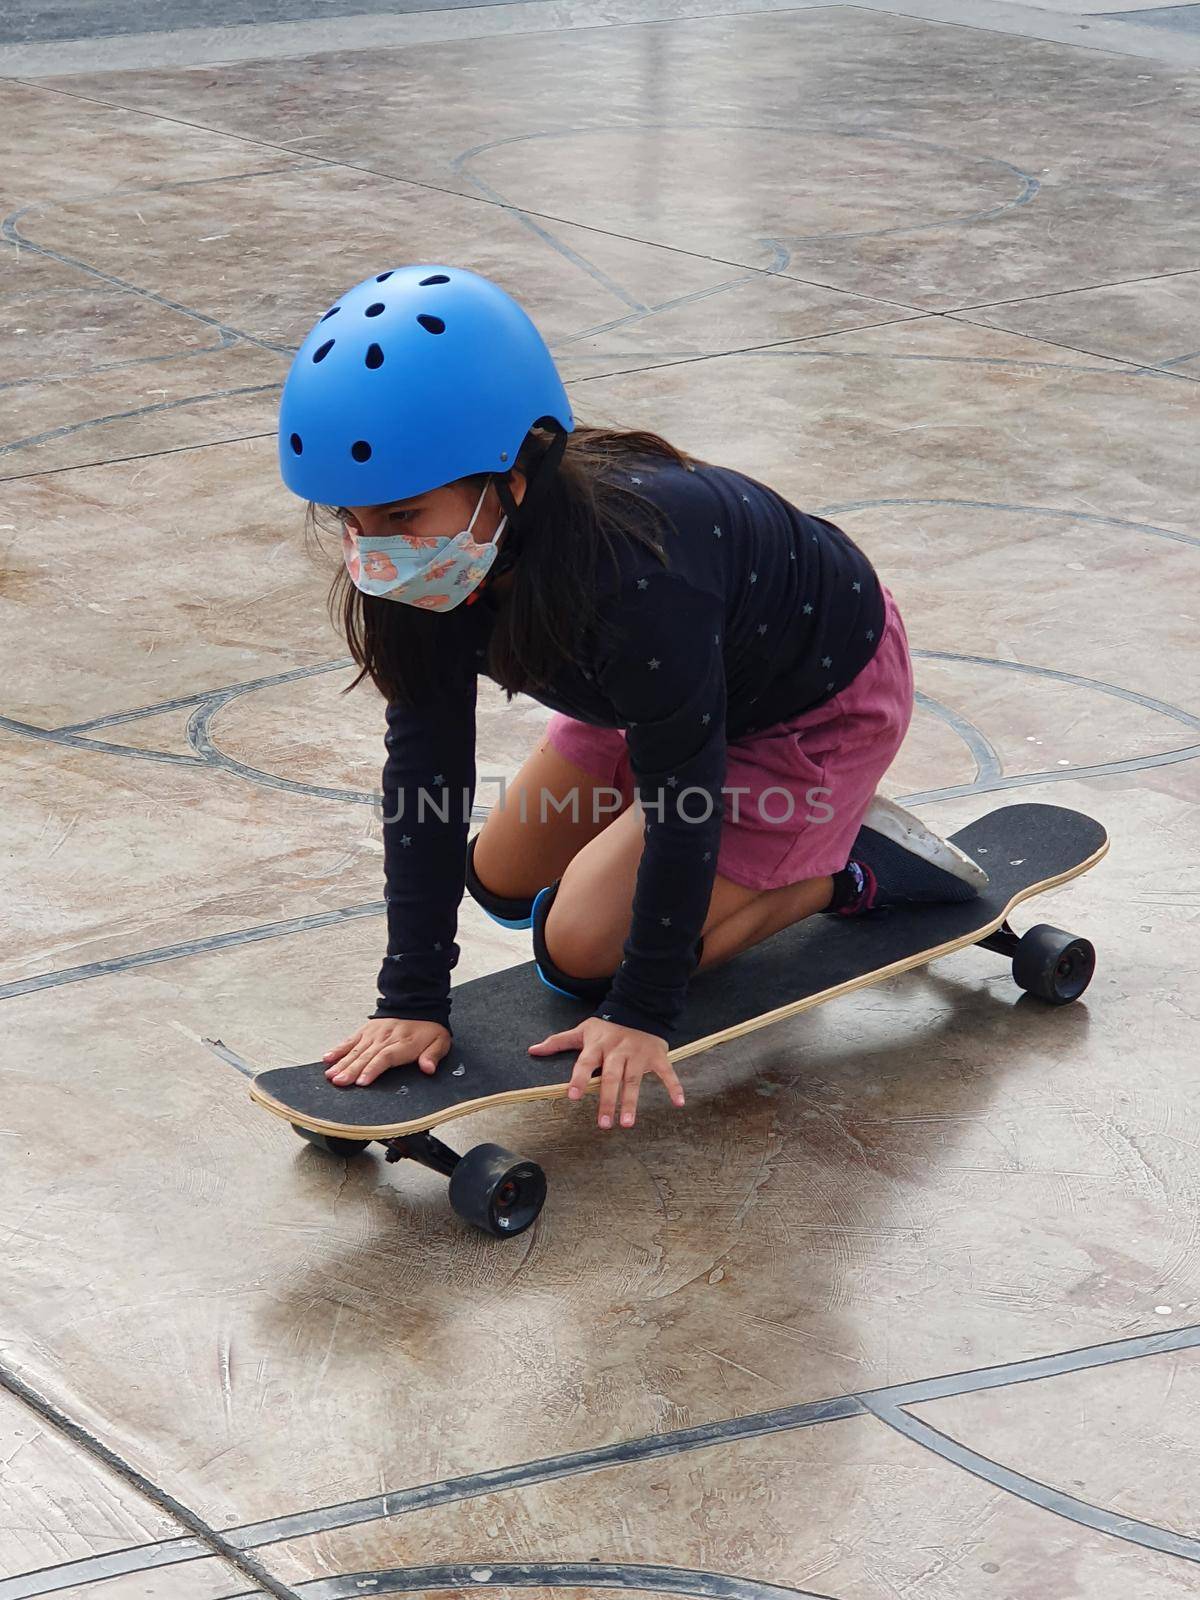 Beautiful skater girl riding on her longboard in the city. by Peruphotoart